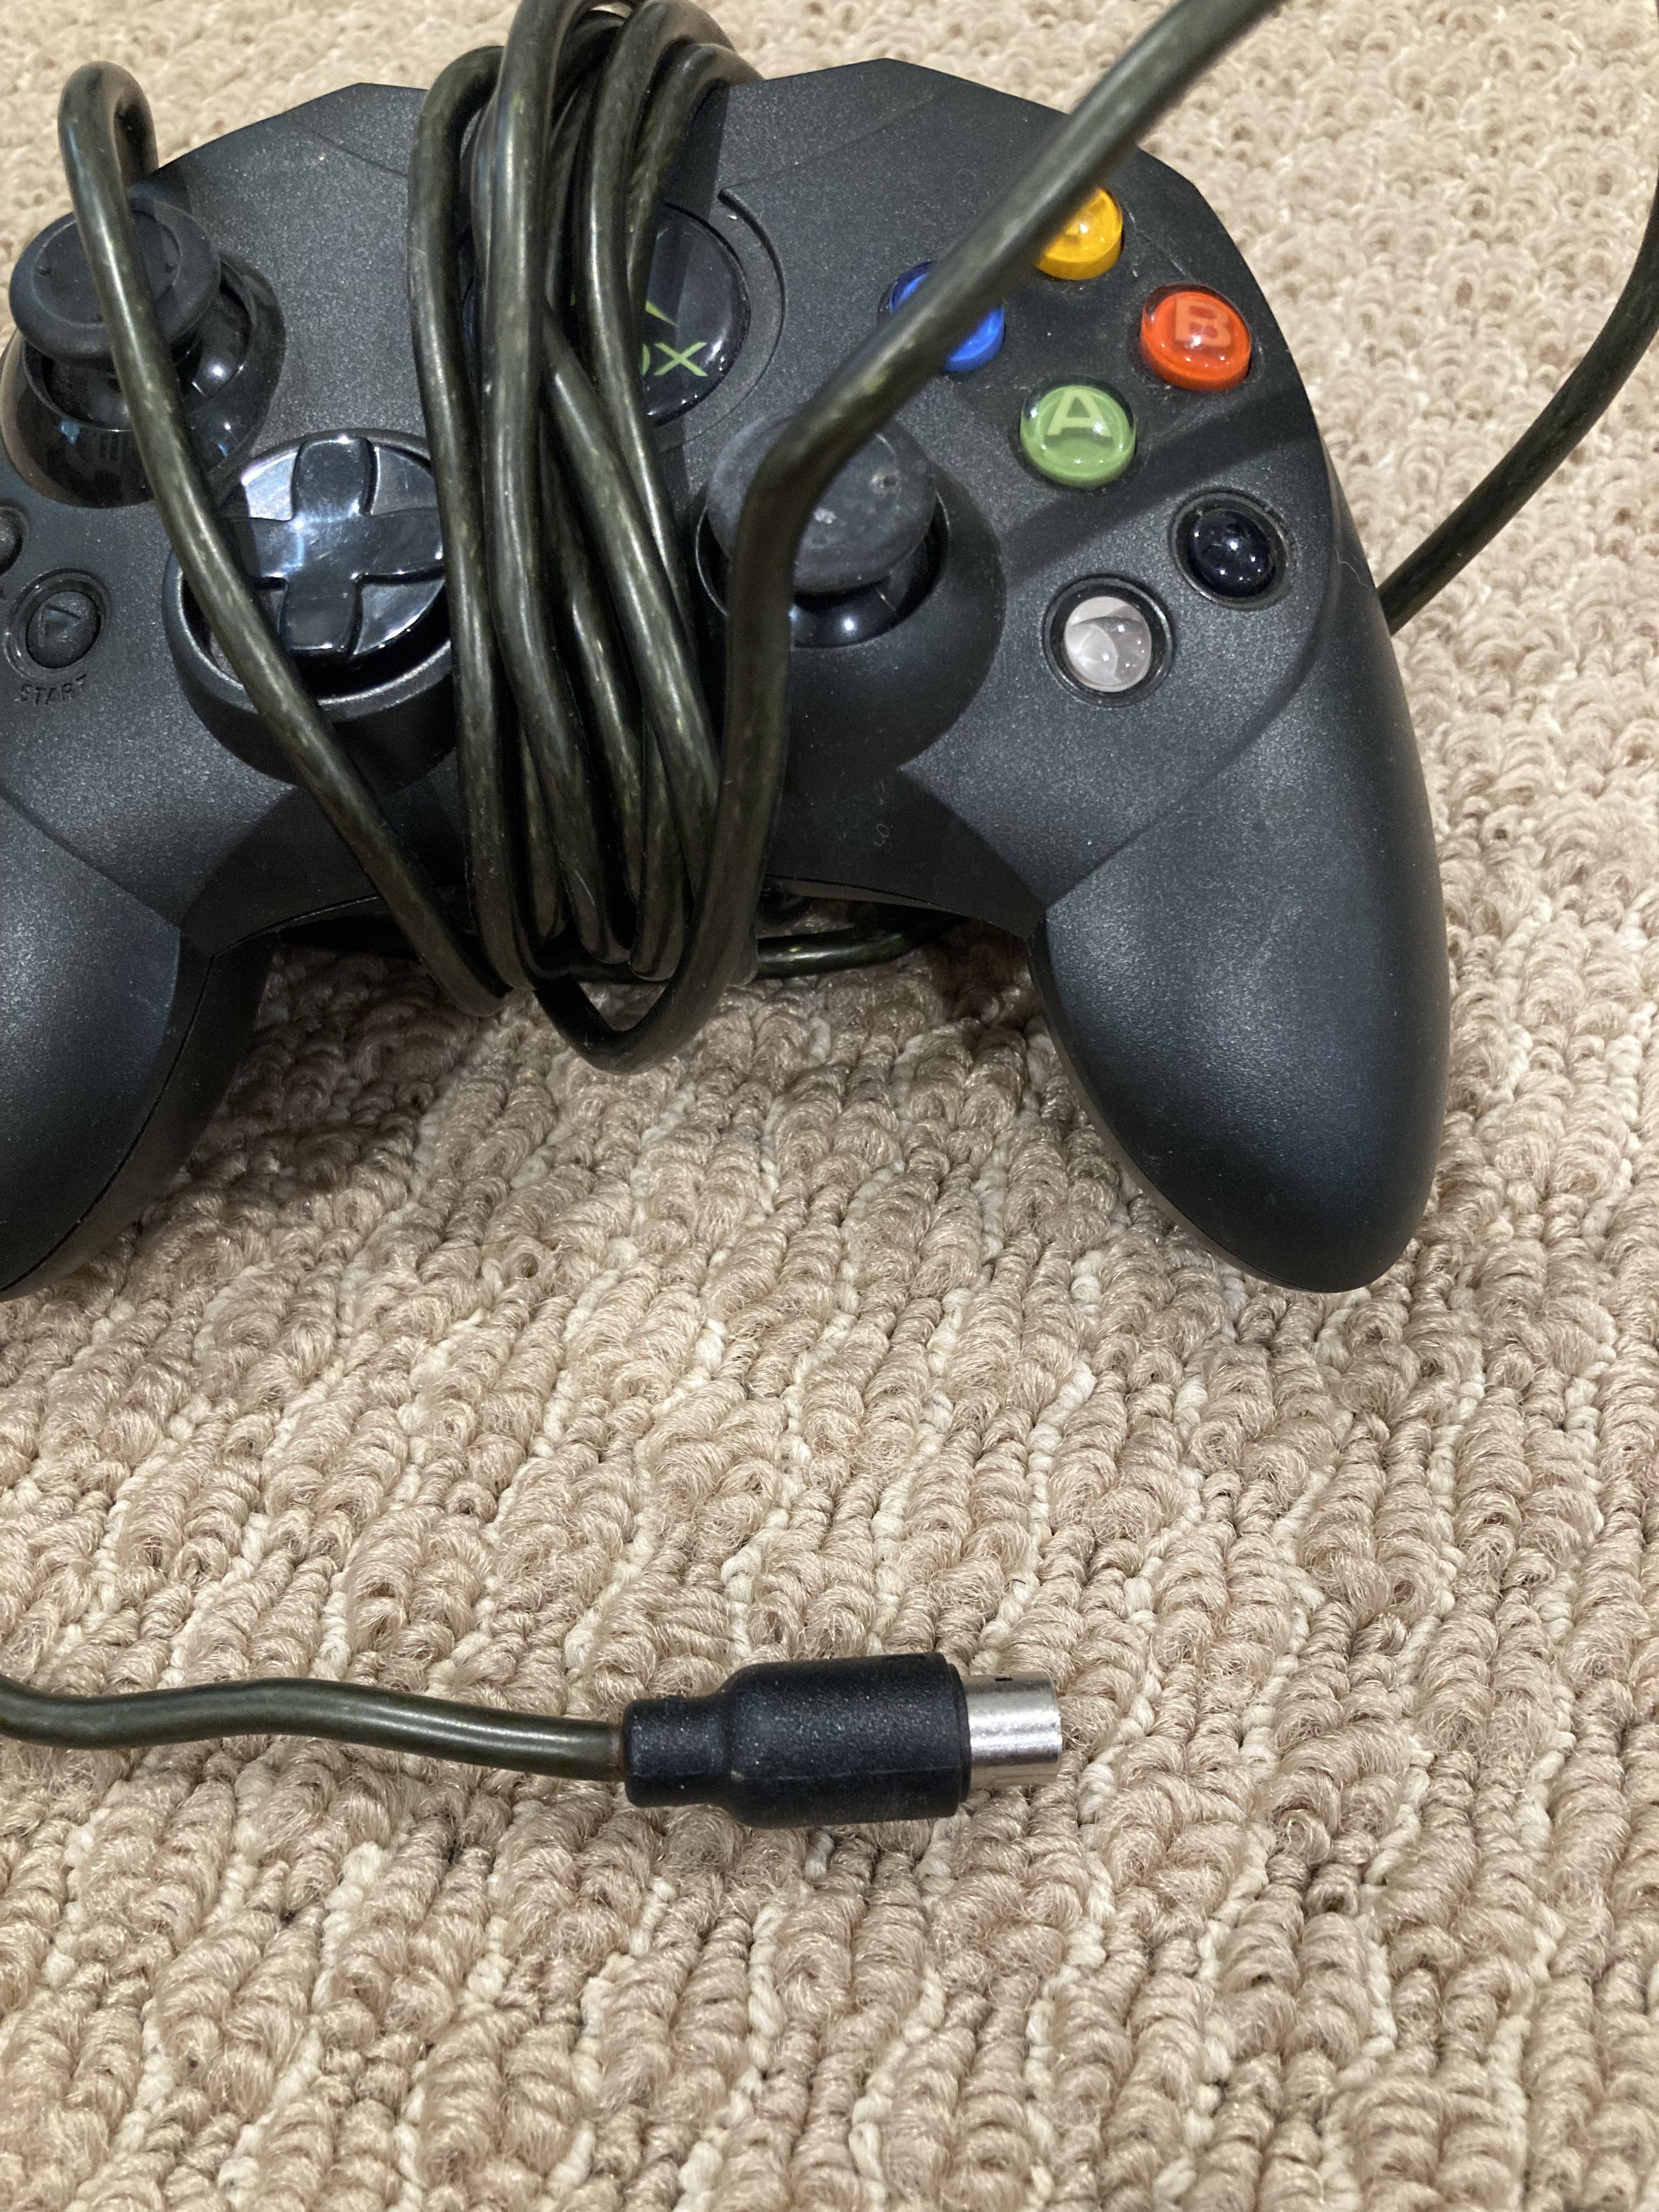 Plug one end of the USB cable into the USB port on the front of the console.
Plug the other end of the USB cable into the USB port on the Xbox One controller.